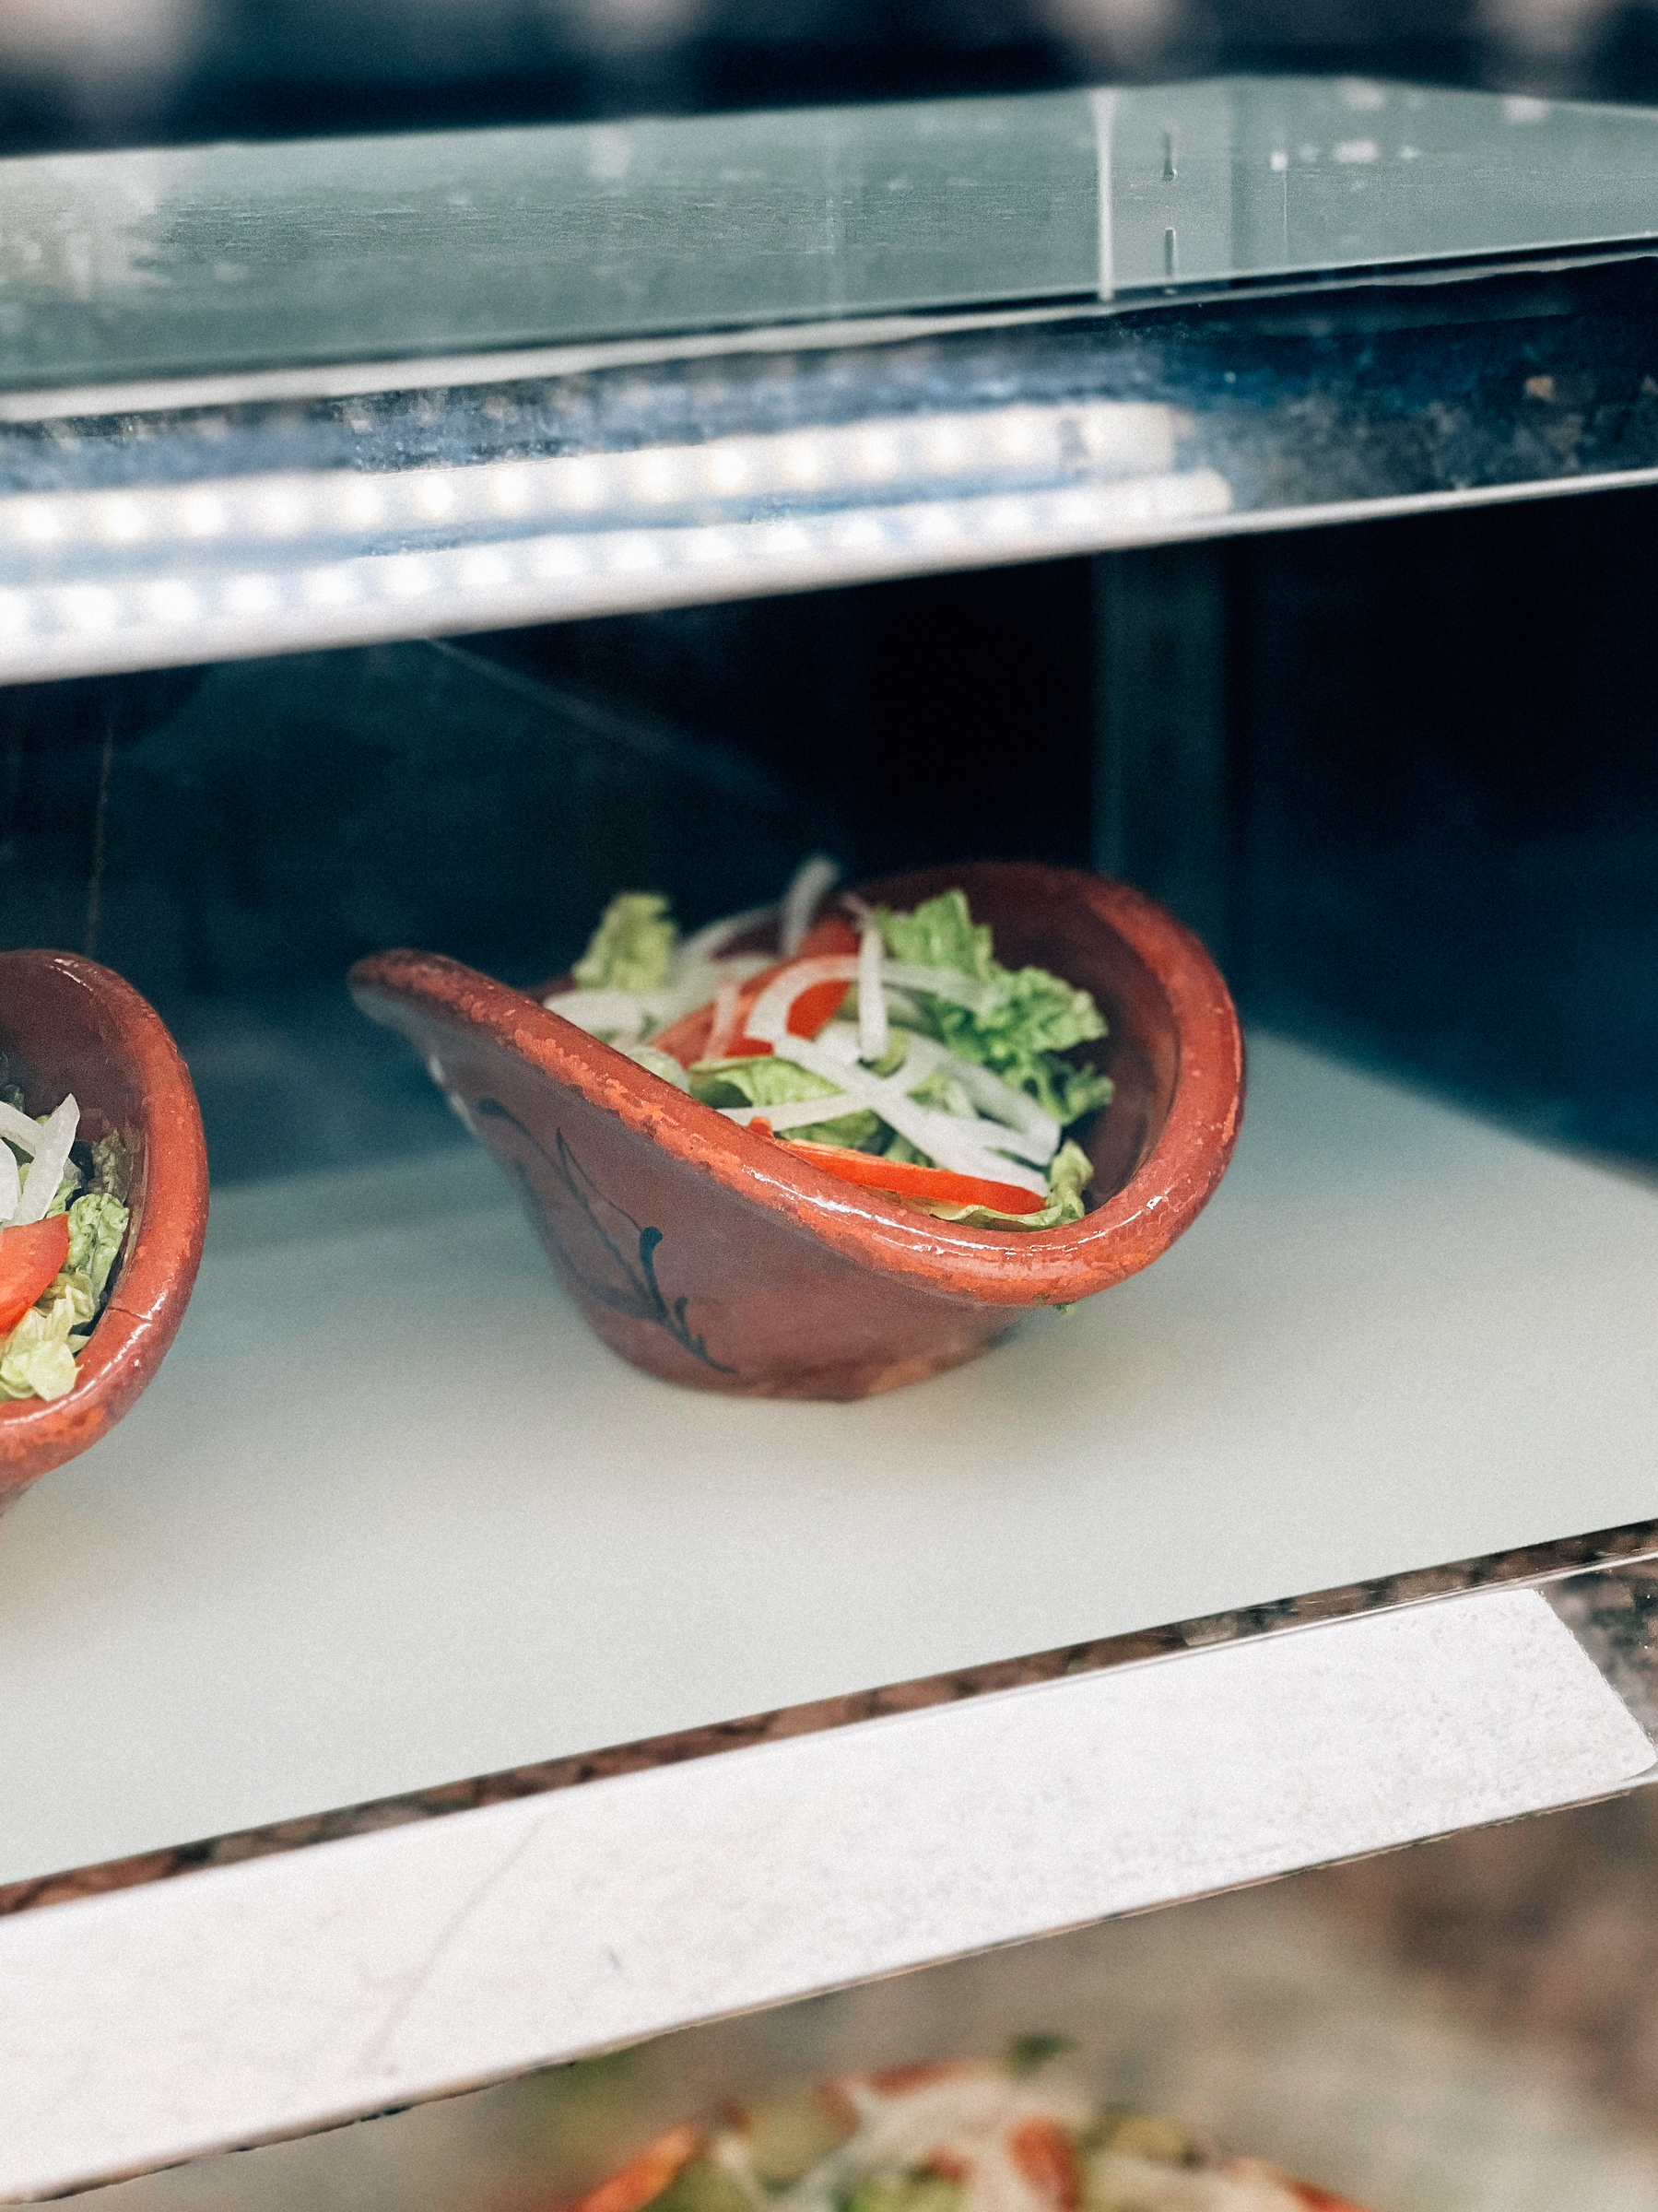 A clay bowl containing fresh salad, consisting of lettuce, onion, and tomato, displayed in a refrigerated case.